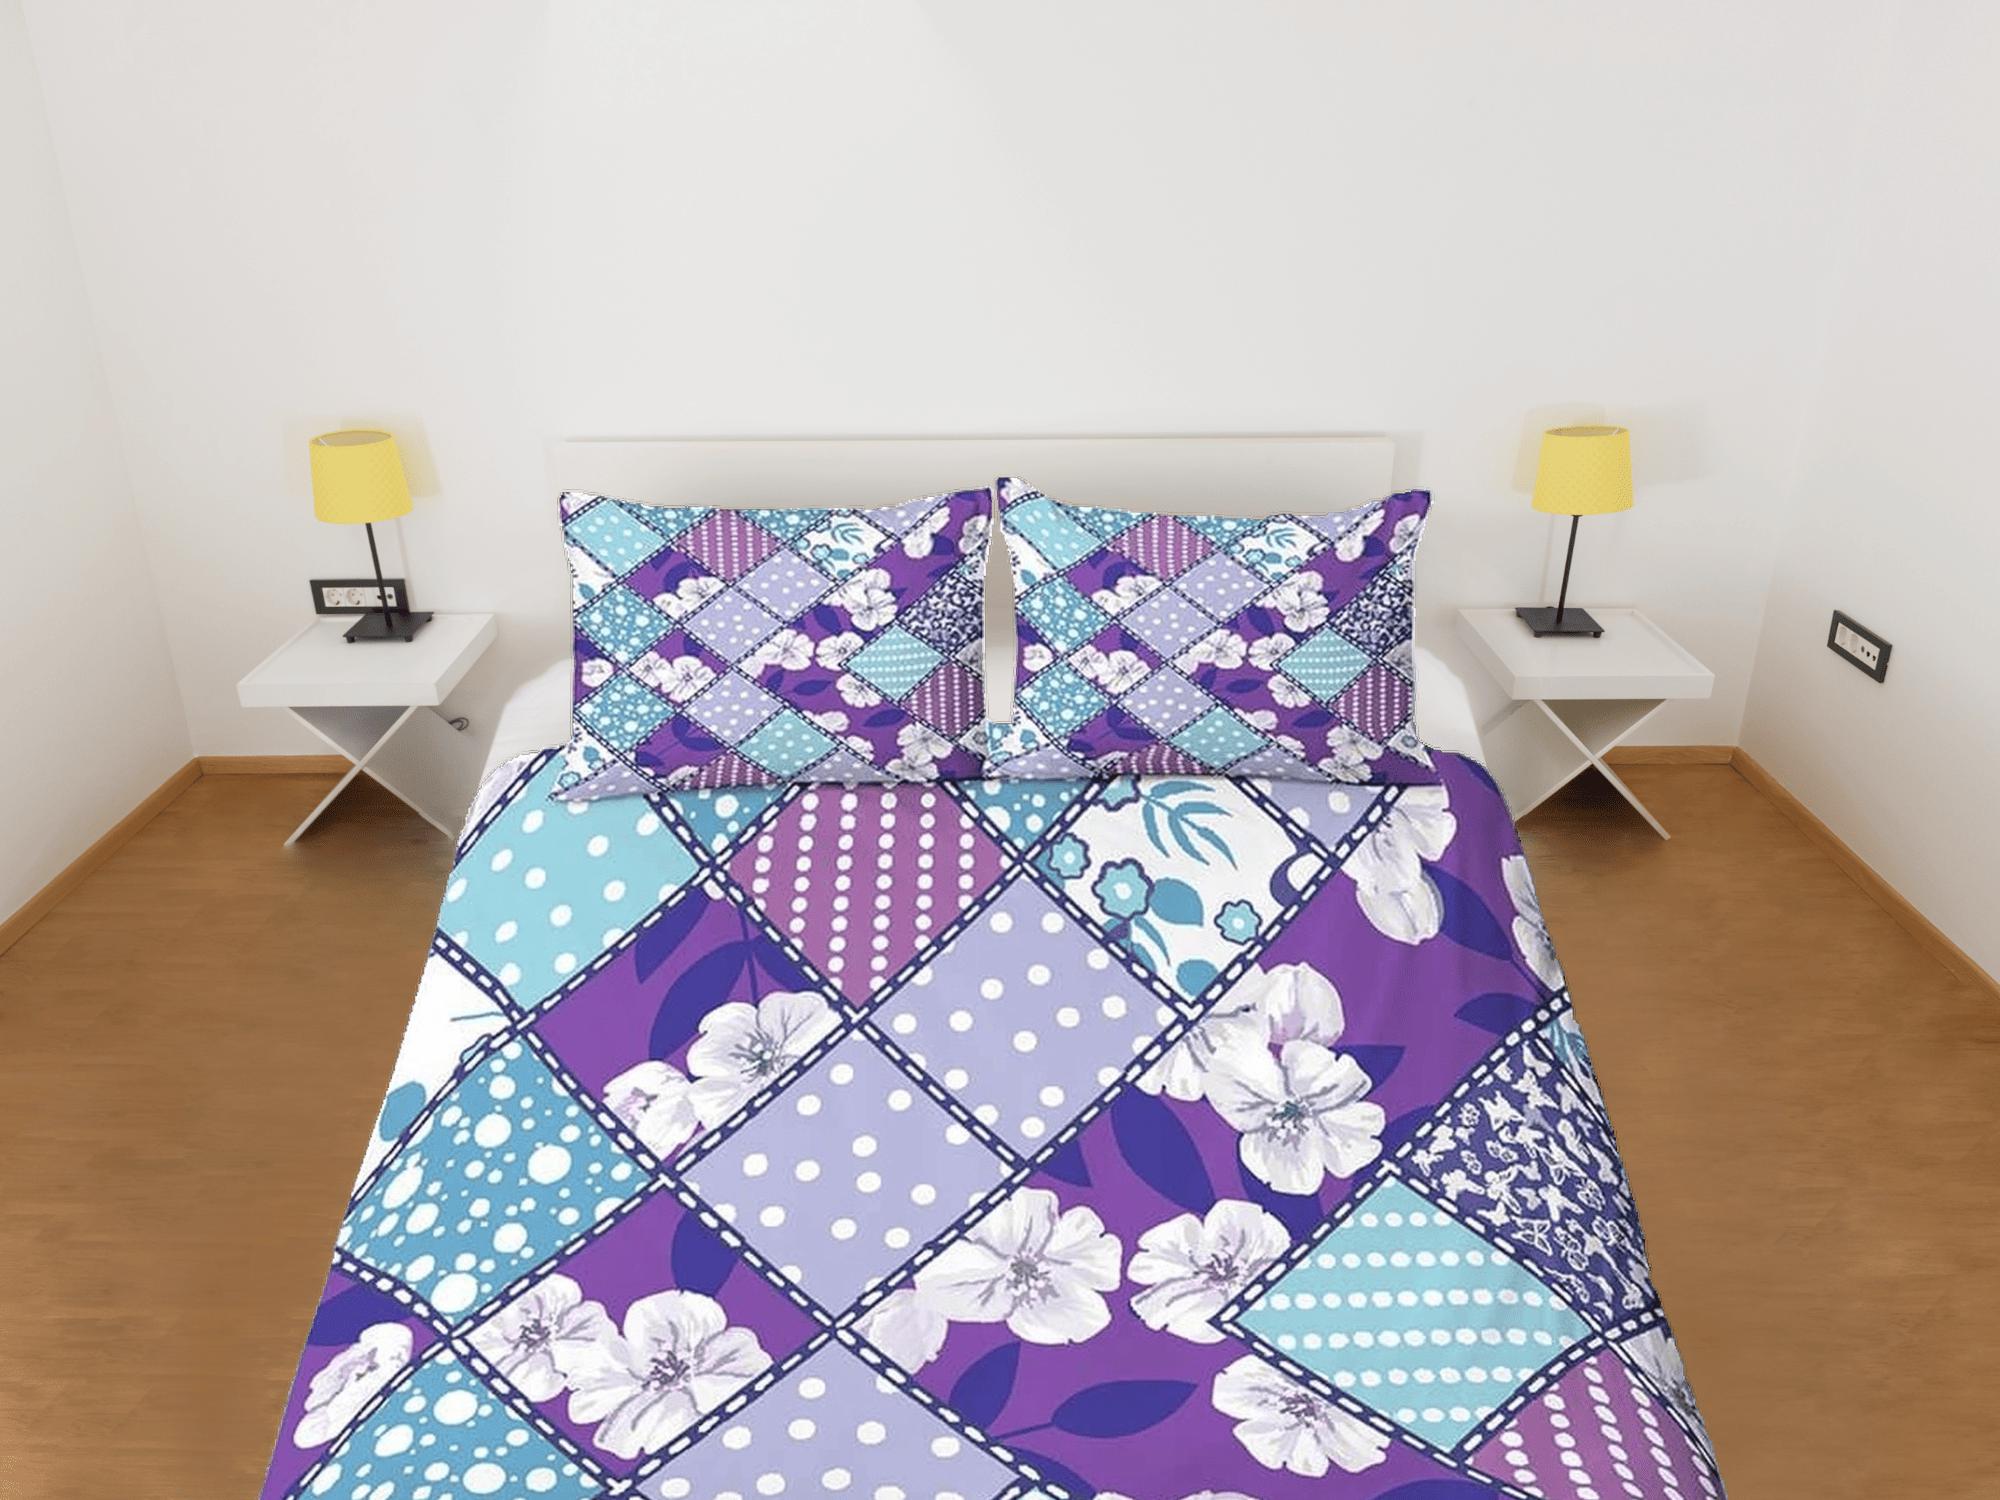 daintyduvet Purple floral patchwork quilt printed duvet cover set, aesthetic room decor bedding set full, king, queen size, boho bedspread shabby chic